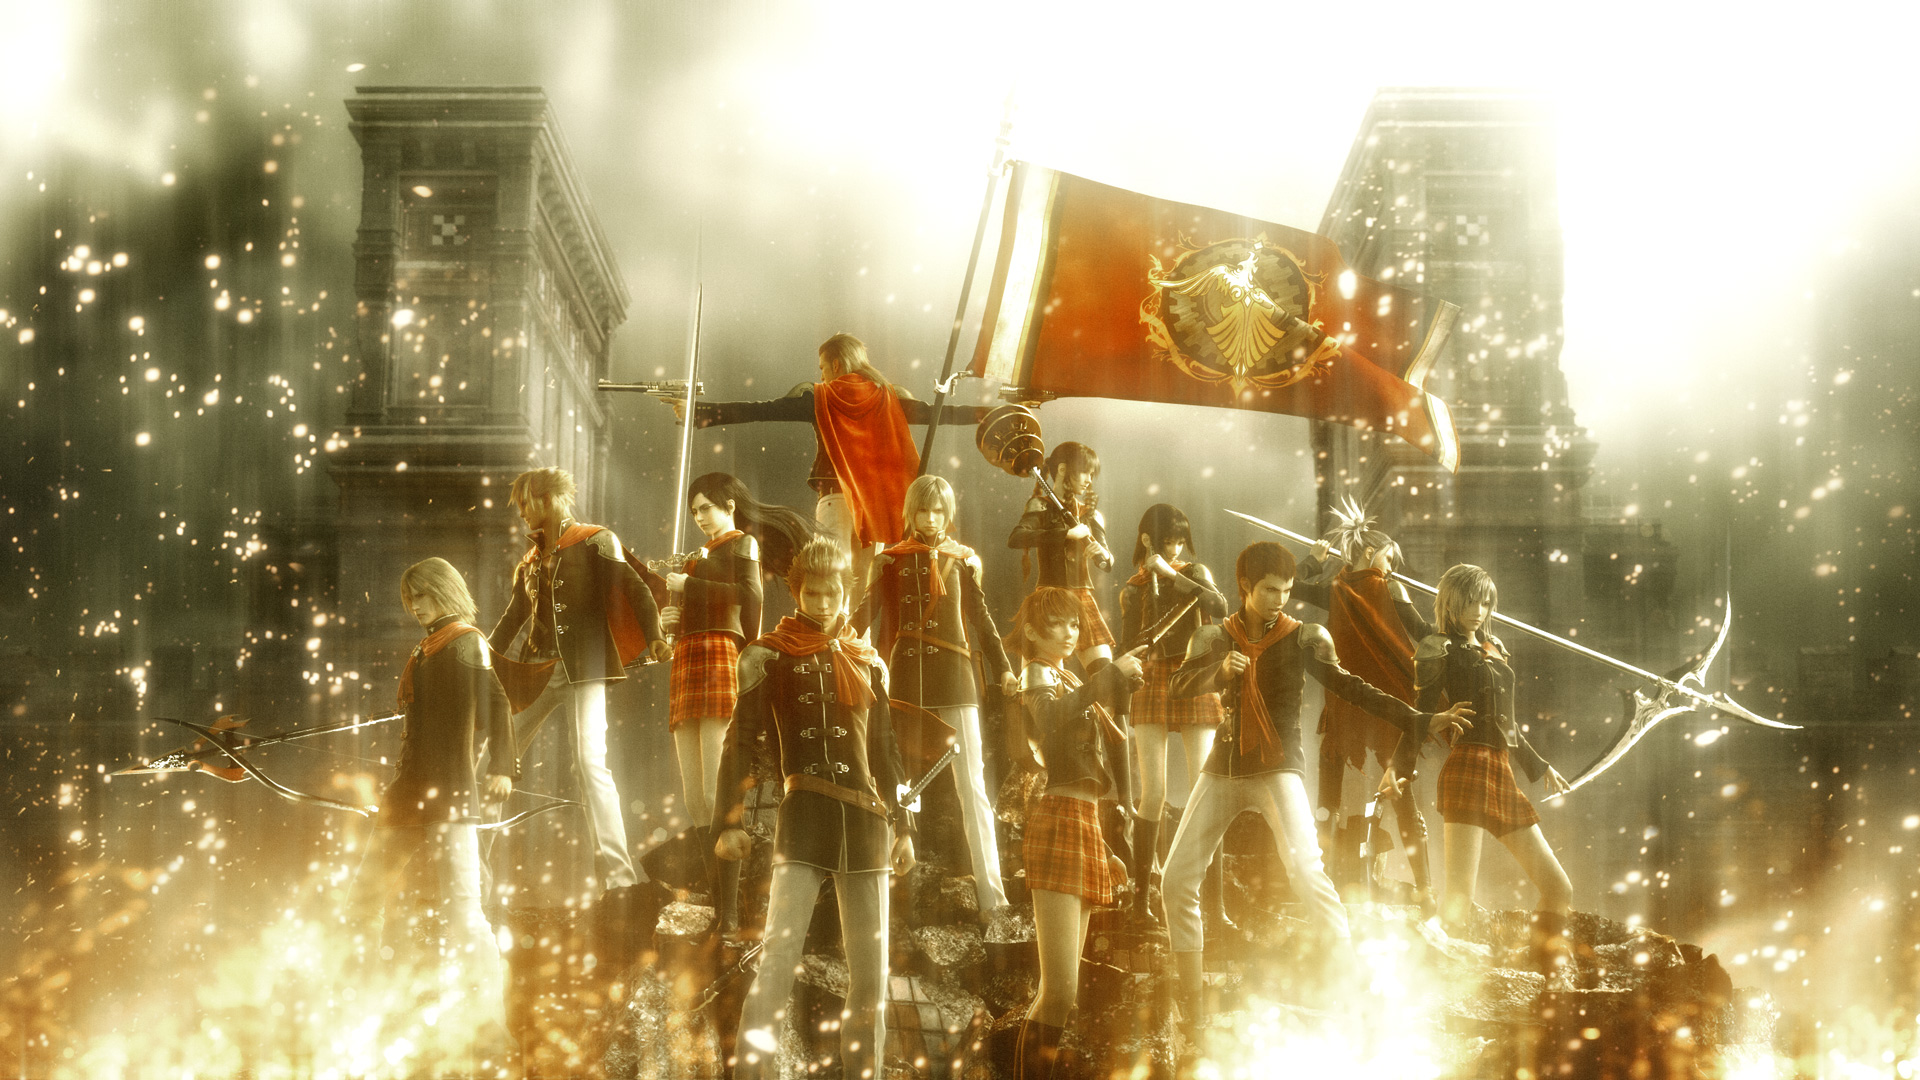 Final Fantasy Type-0 HD Backgrounds, Compatible - PC, Mobile, Gadgets| 1920x1080 px